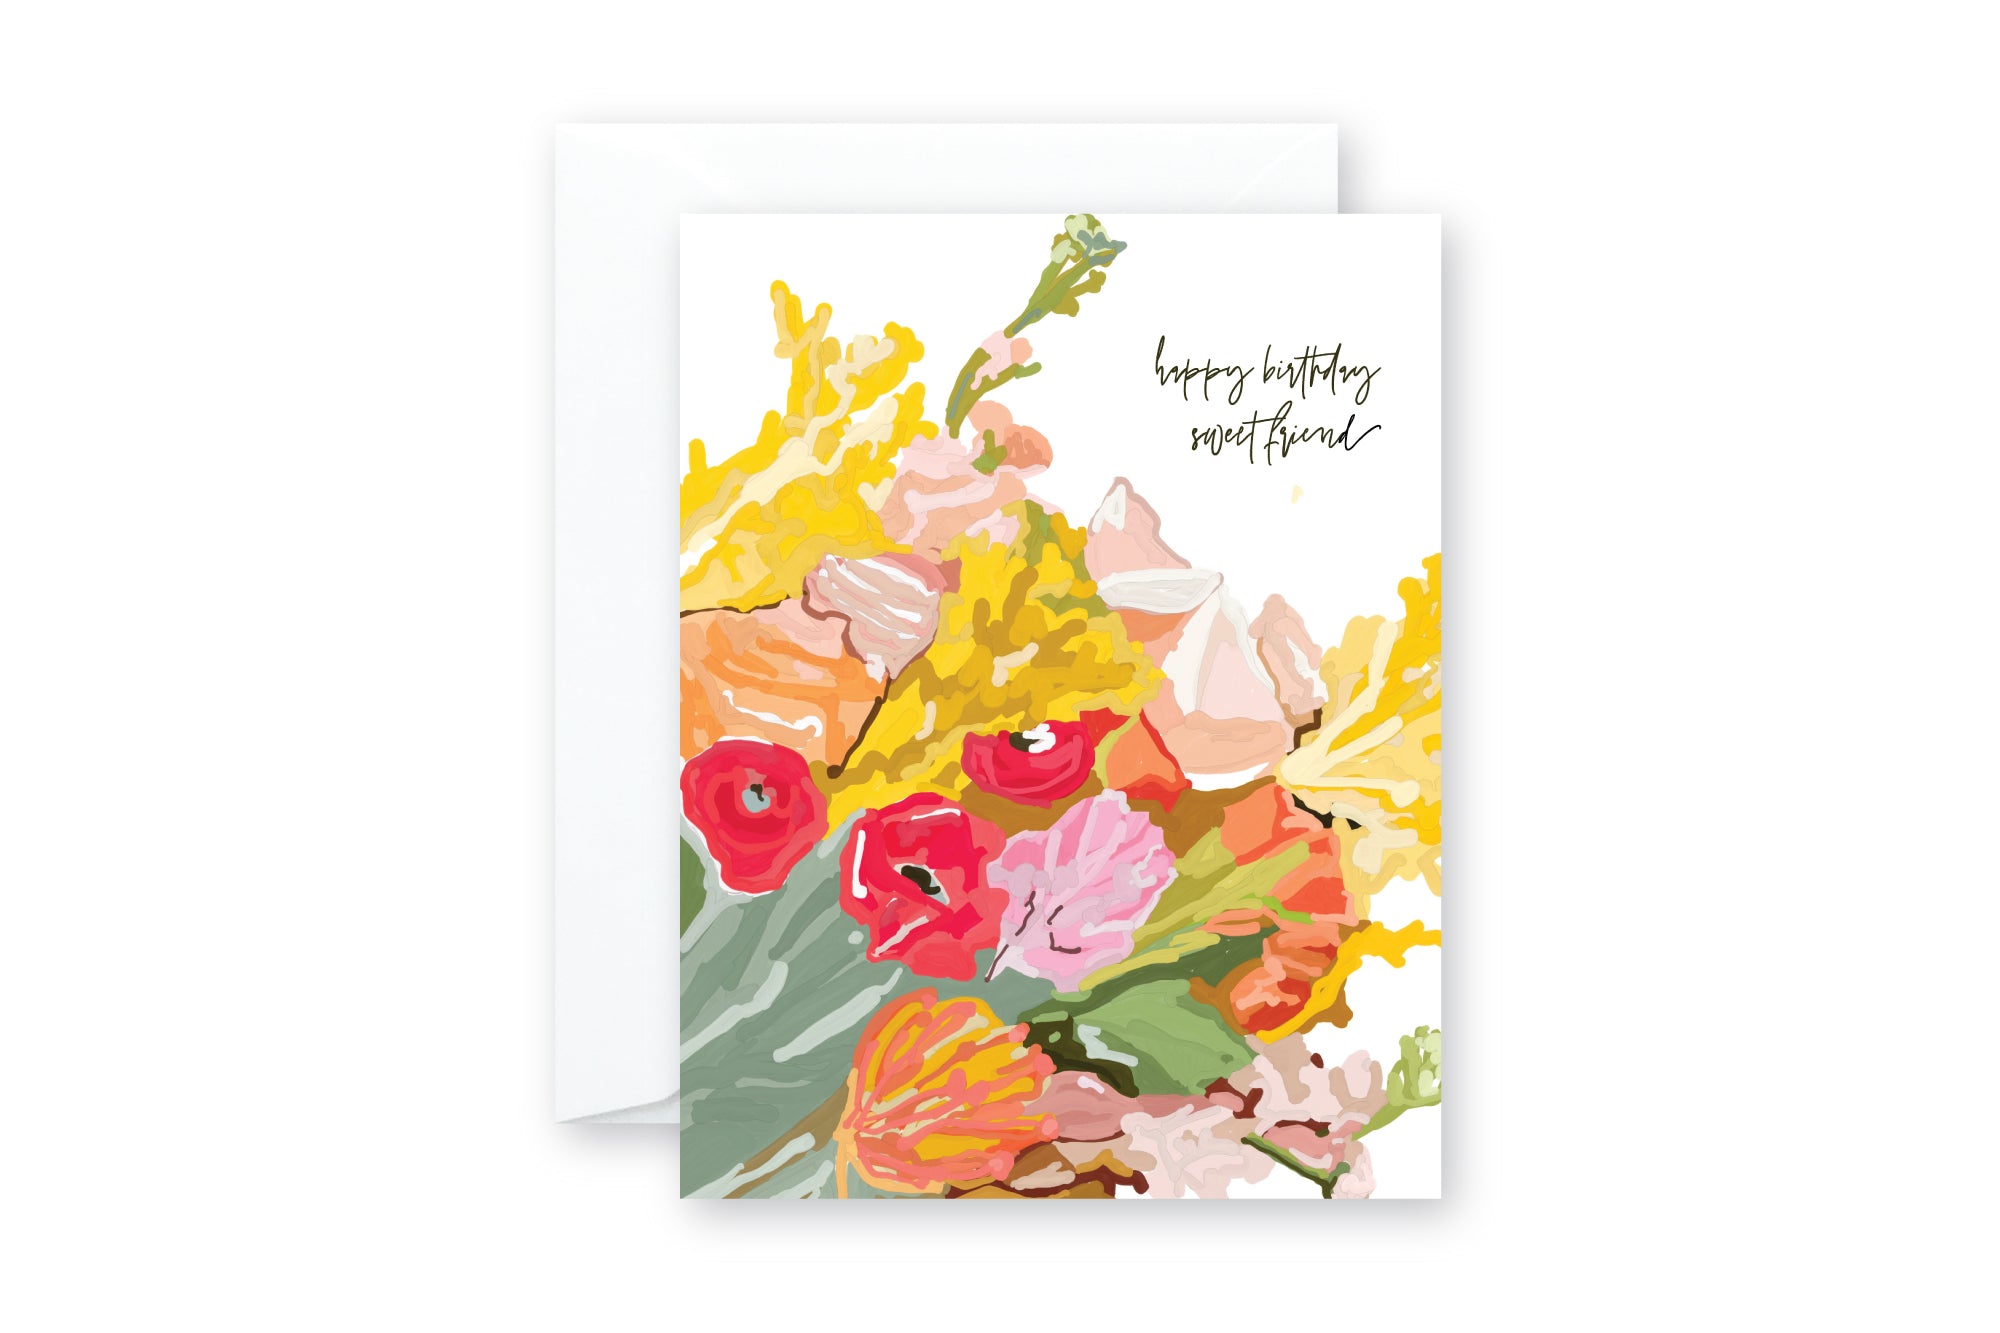 Greeting card with illustrated floral bouquet in shades of golden, pink, coral. HAPPY BIRTHDAY SWEET FRIEND. White envelope